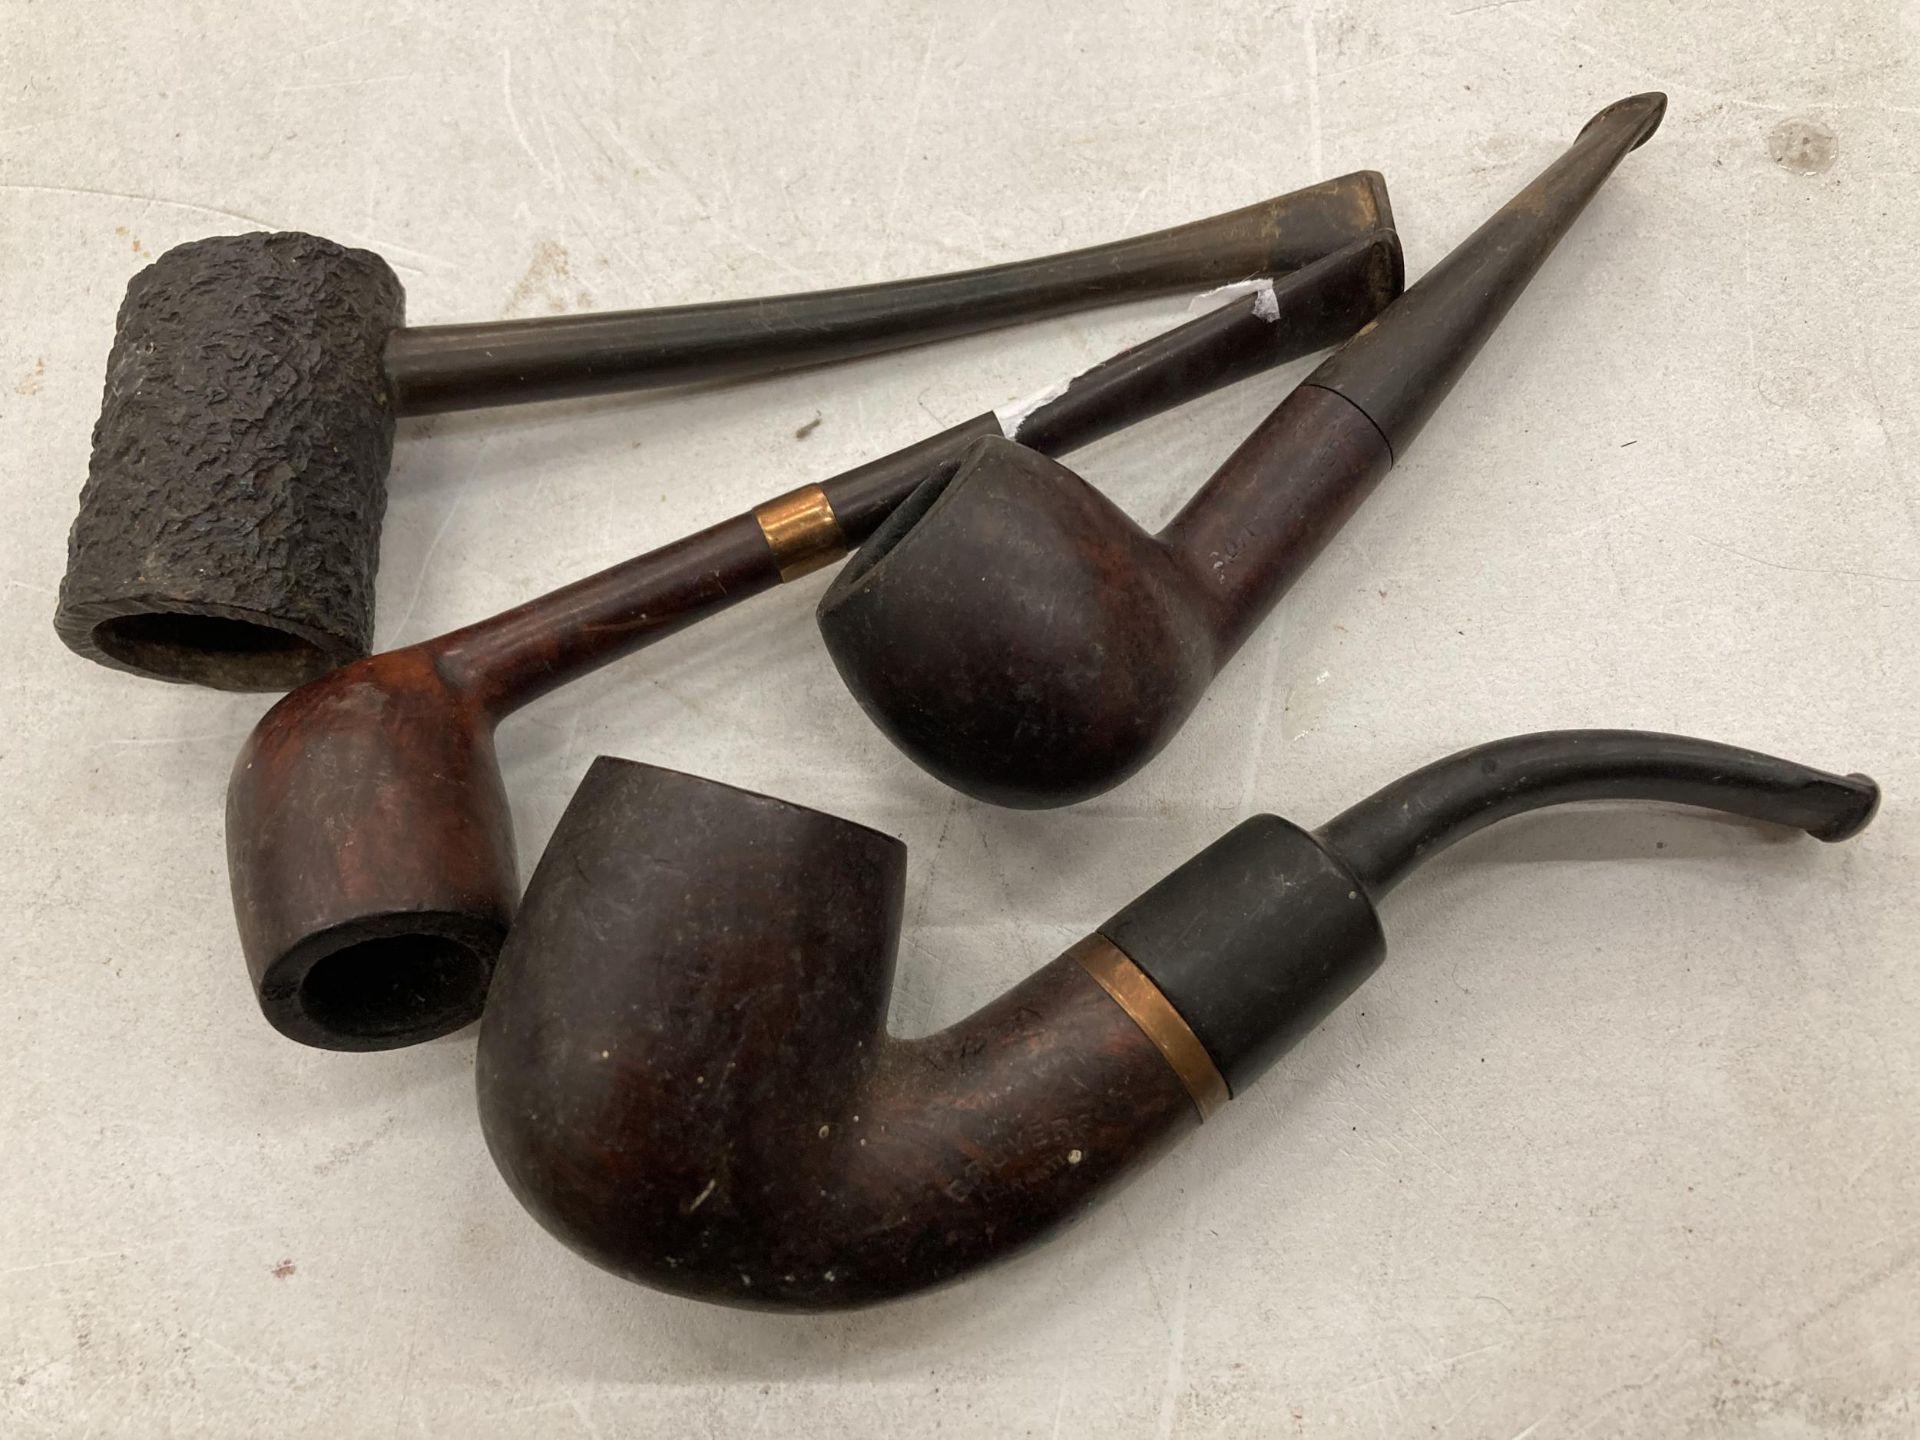 FOUR VINTAGE PIPES